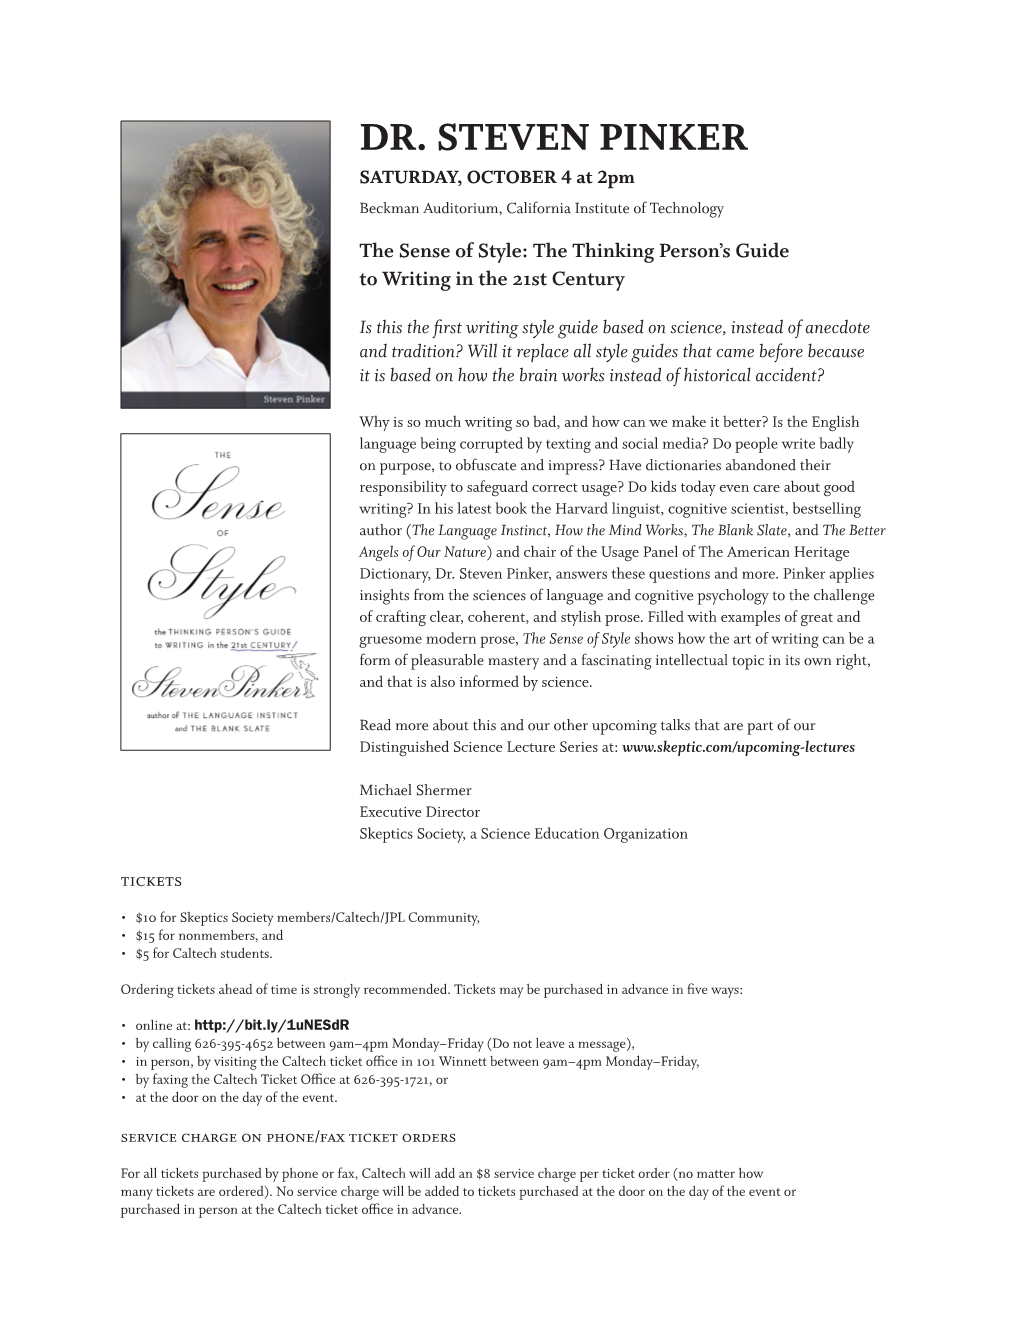 DR. STEVEN PINKER SATURDAY, OCTOBER 4 at 2Pm Beckman Auditorium, California Institute of Technology